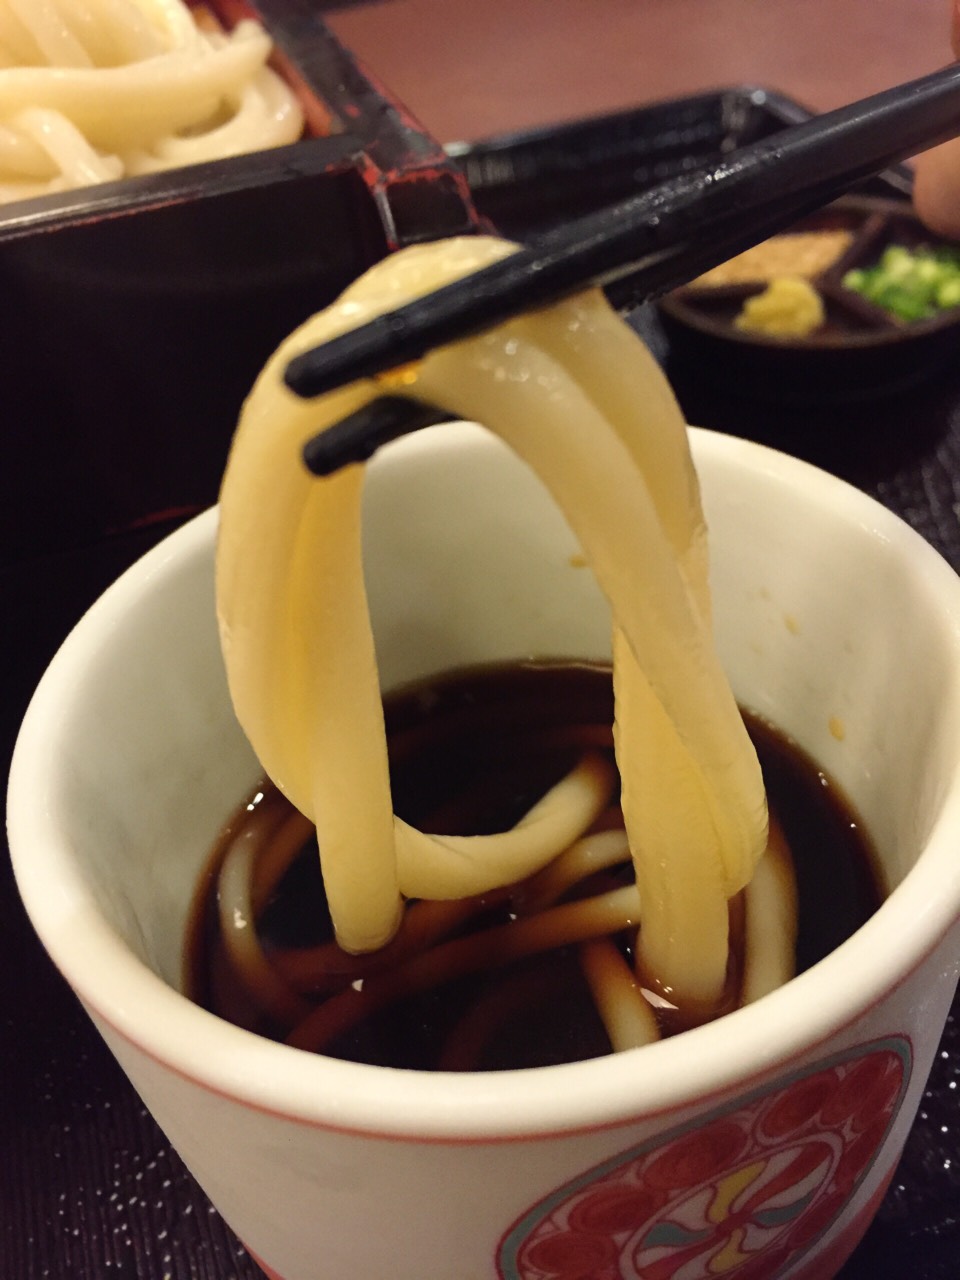 Loved by the Locals: Udon Shop “Mugino-Sato”